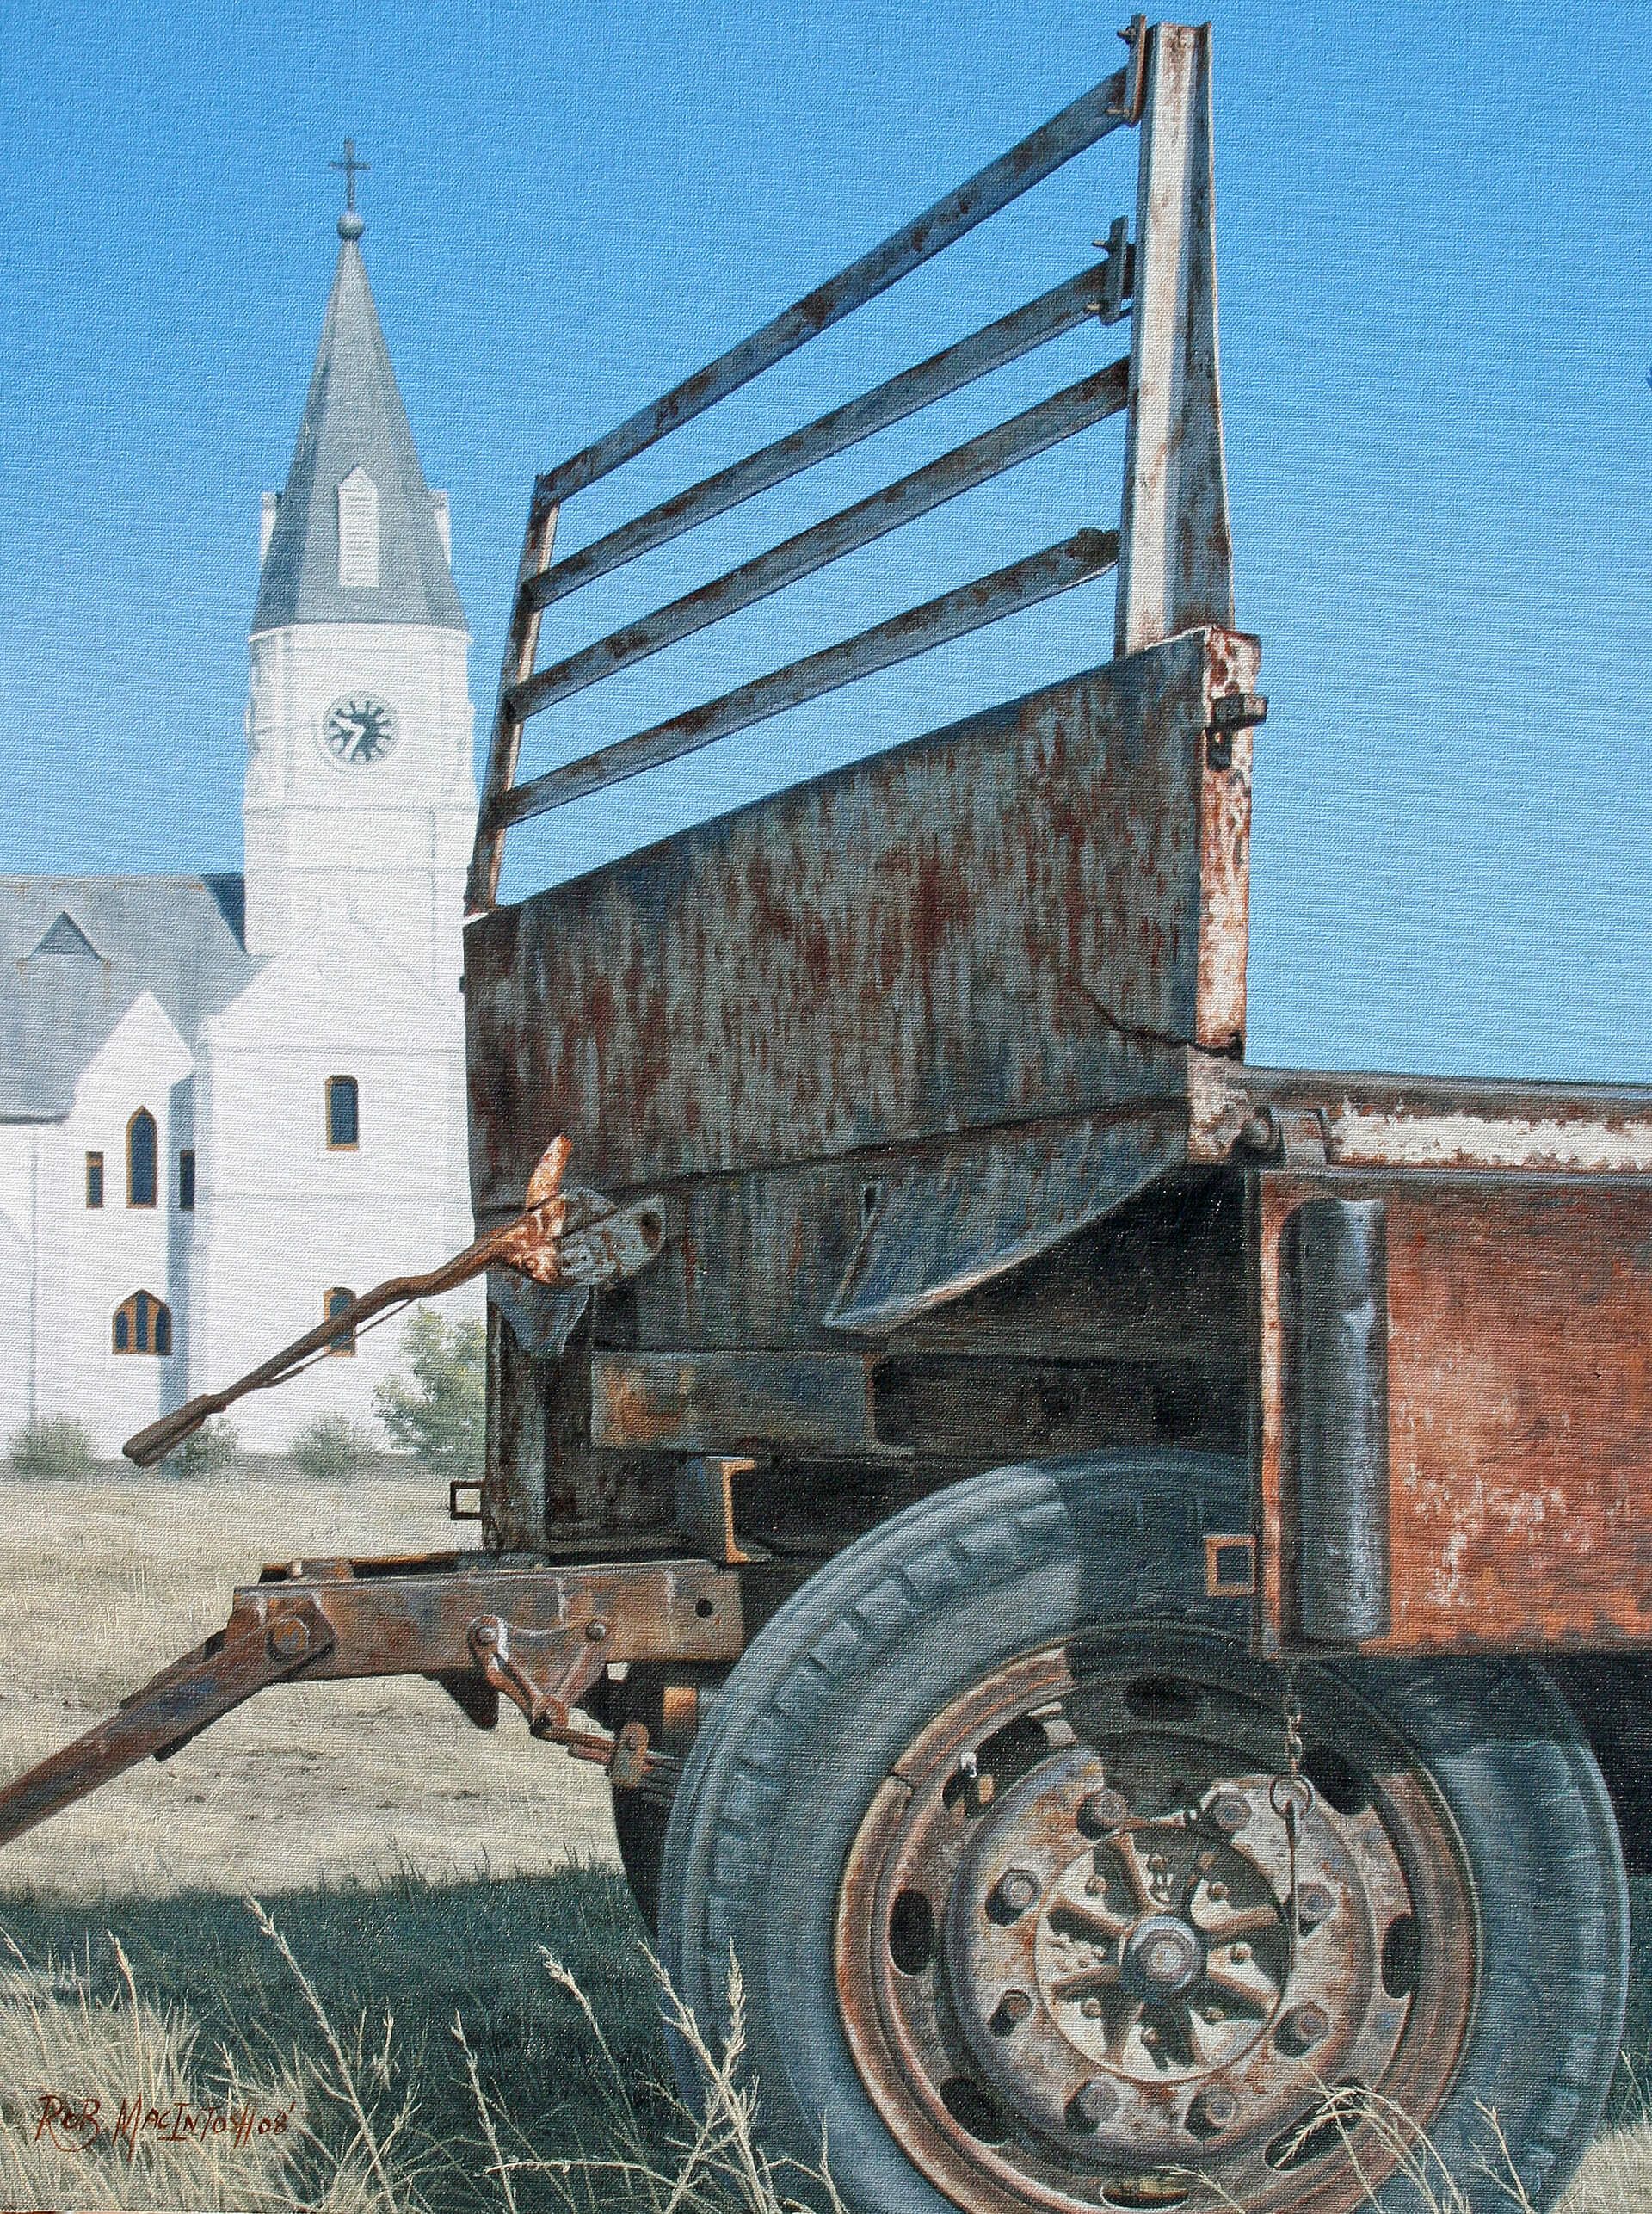 Photorealistic painting of a tractor in a field with a church building in the background